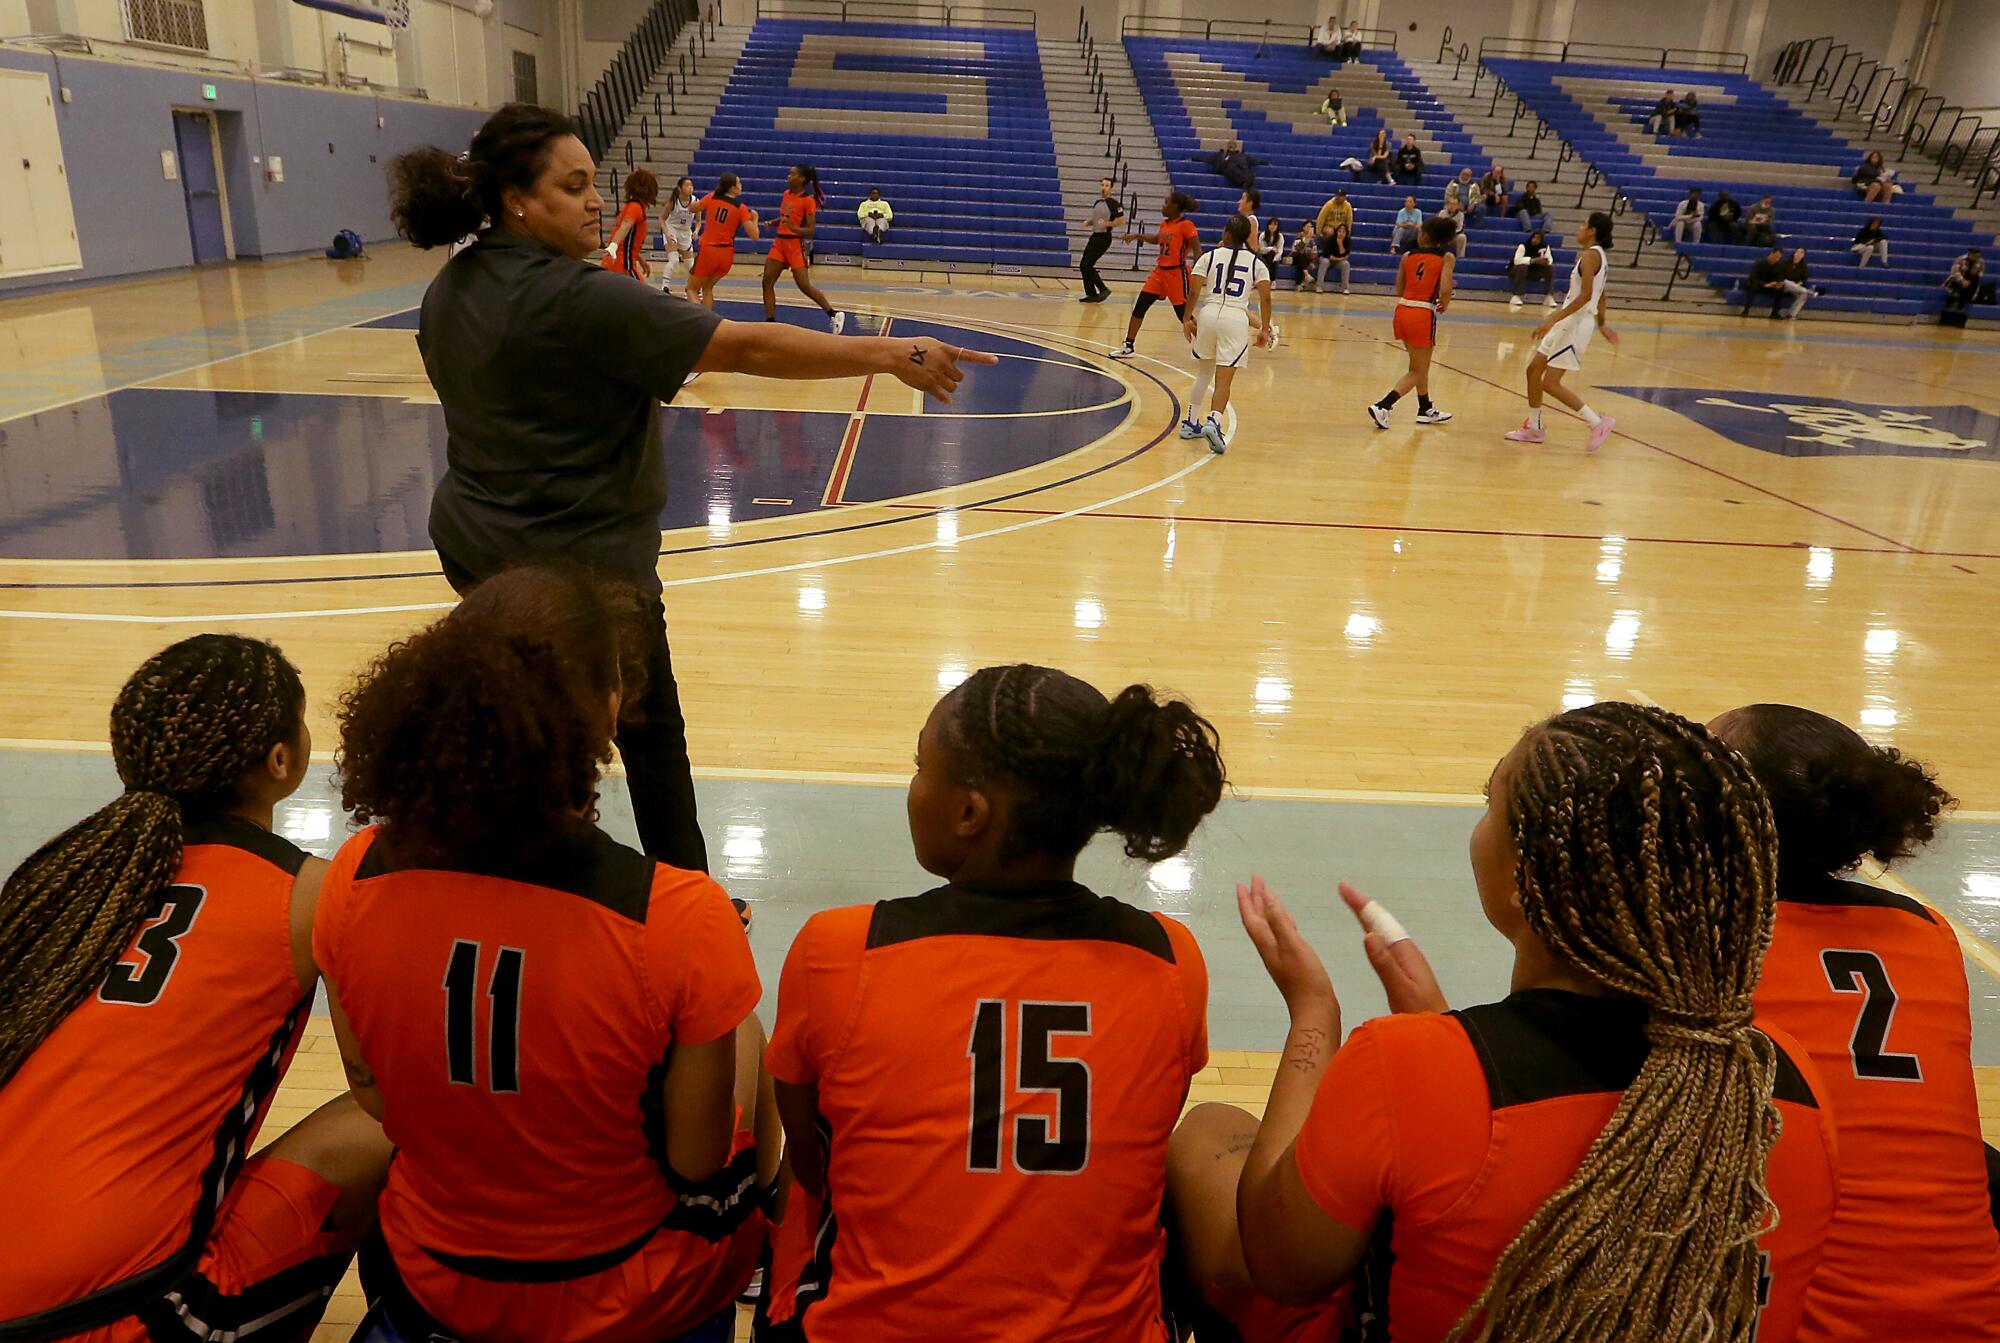 Riverside City College women's basketball coach Alicia Berber directs her players during a game.